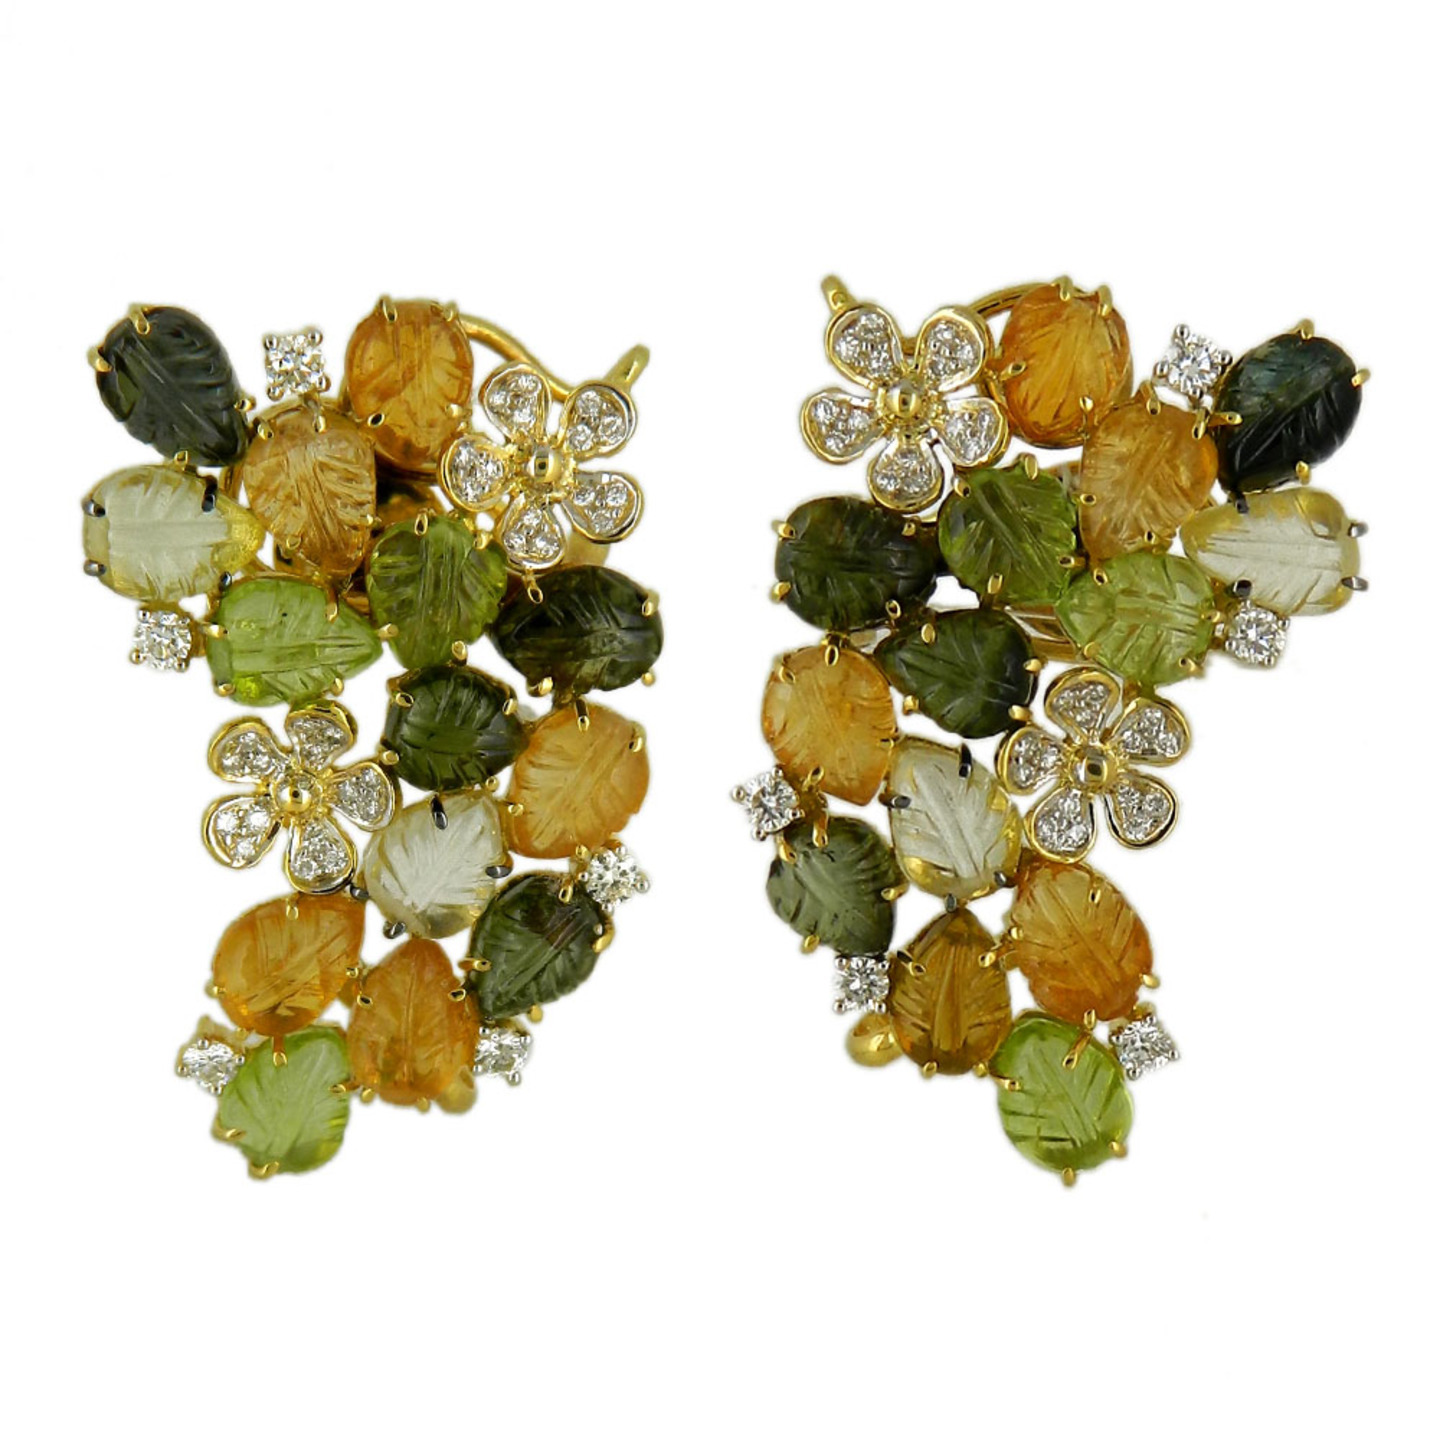 A stunning pair of multi tourmaline citrine leaf shaped gemstone cluster earrings, with diamonds